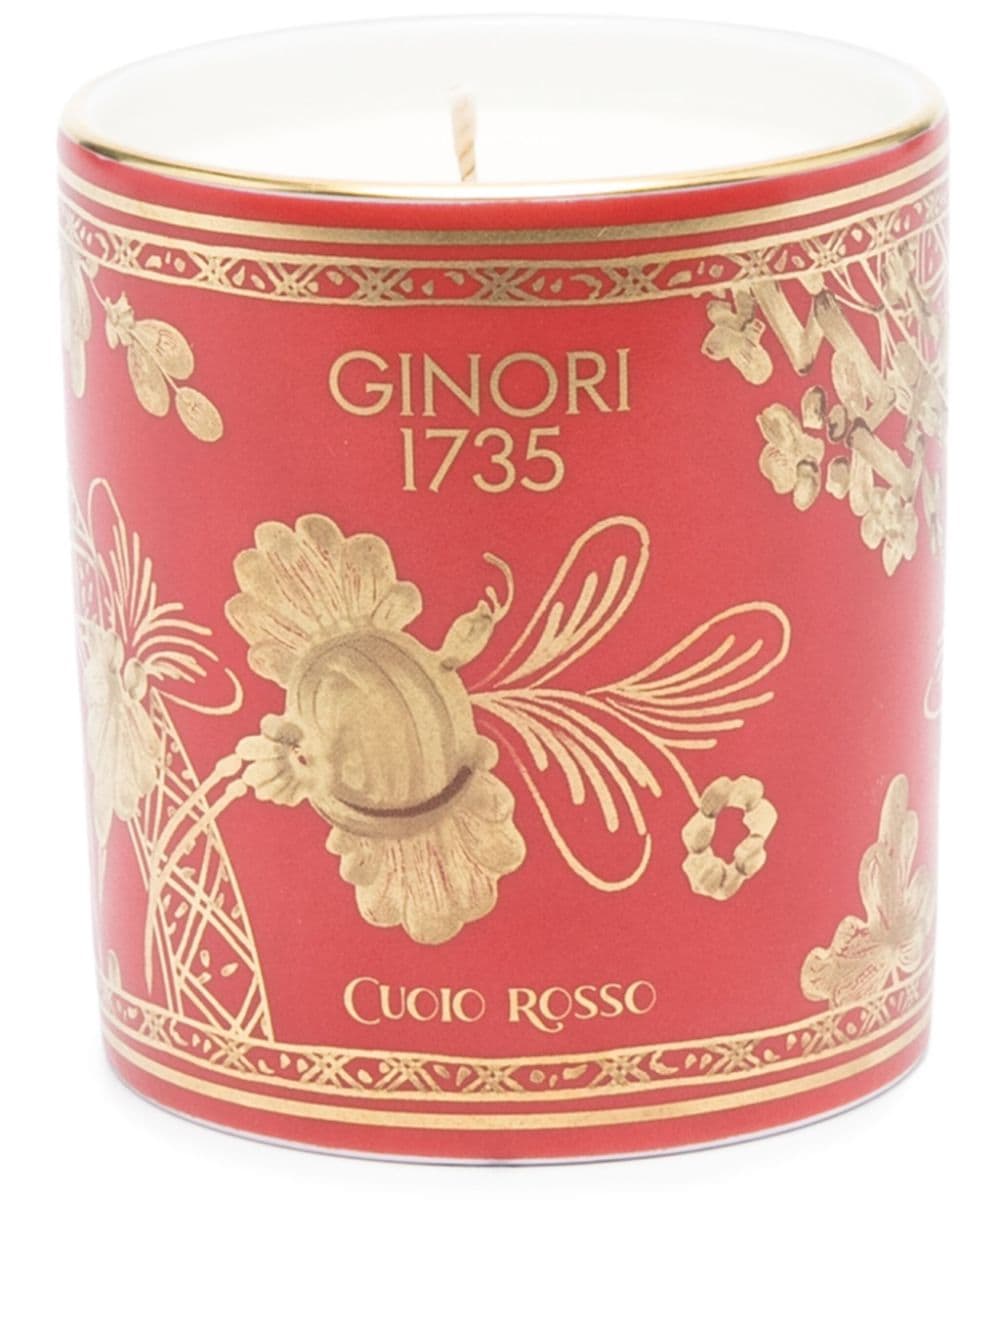 Ginori 1735 Cuoio Rosso Candle (503g) In Red